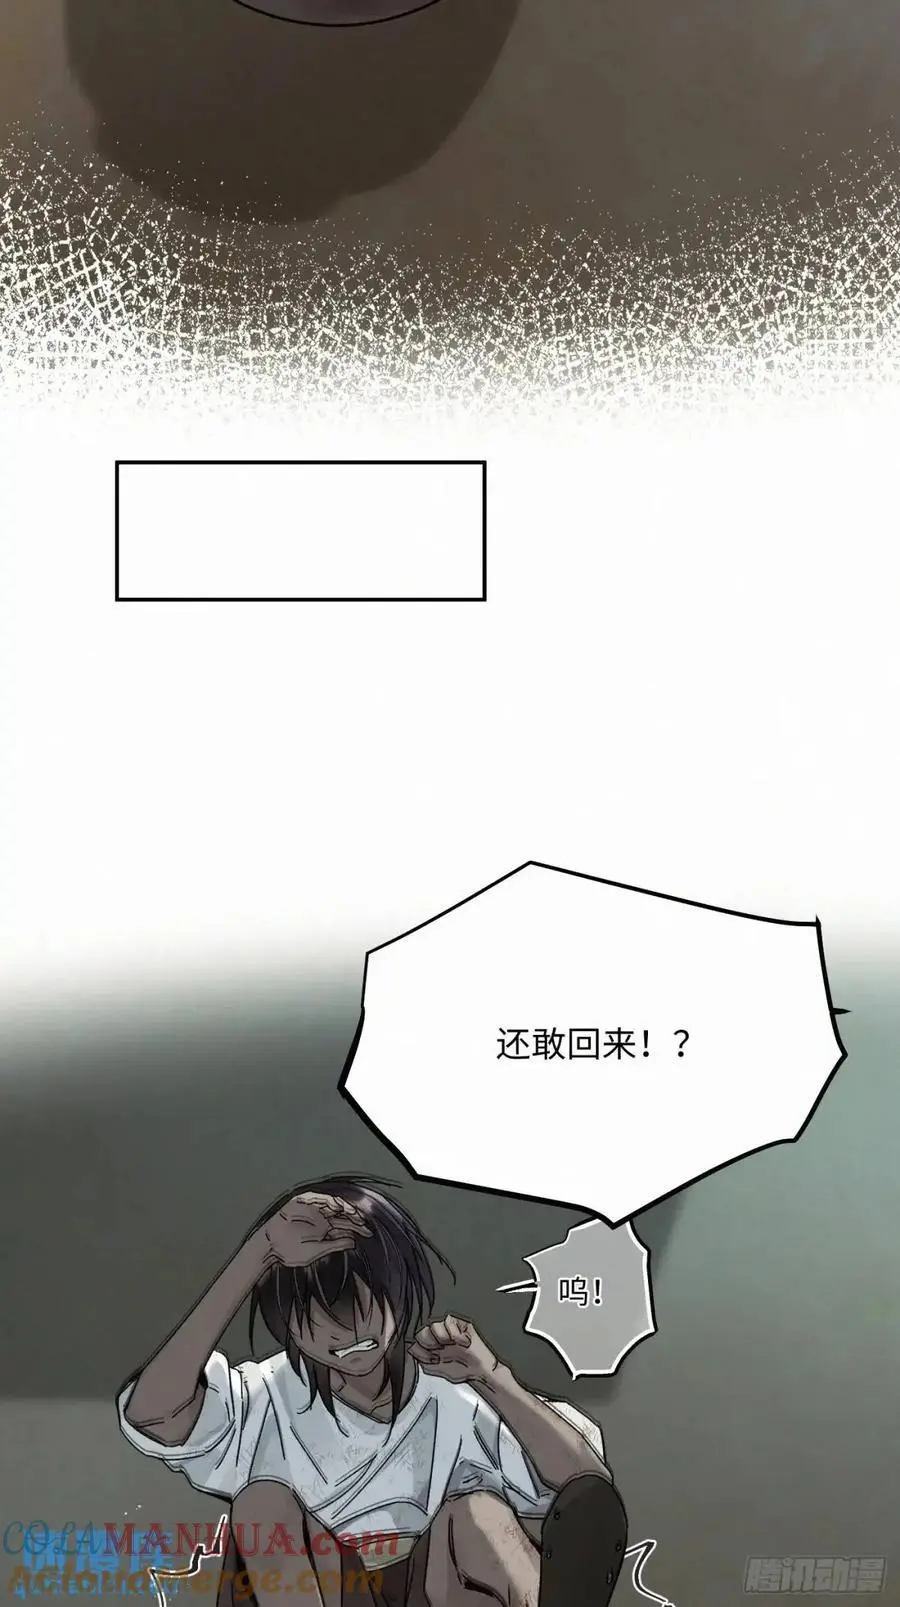 10 chapter · 104